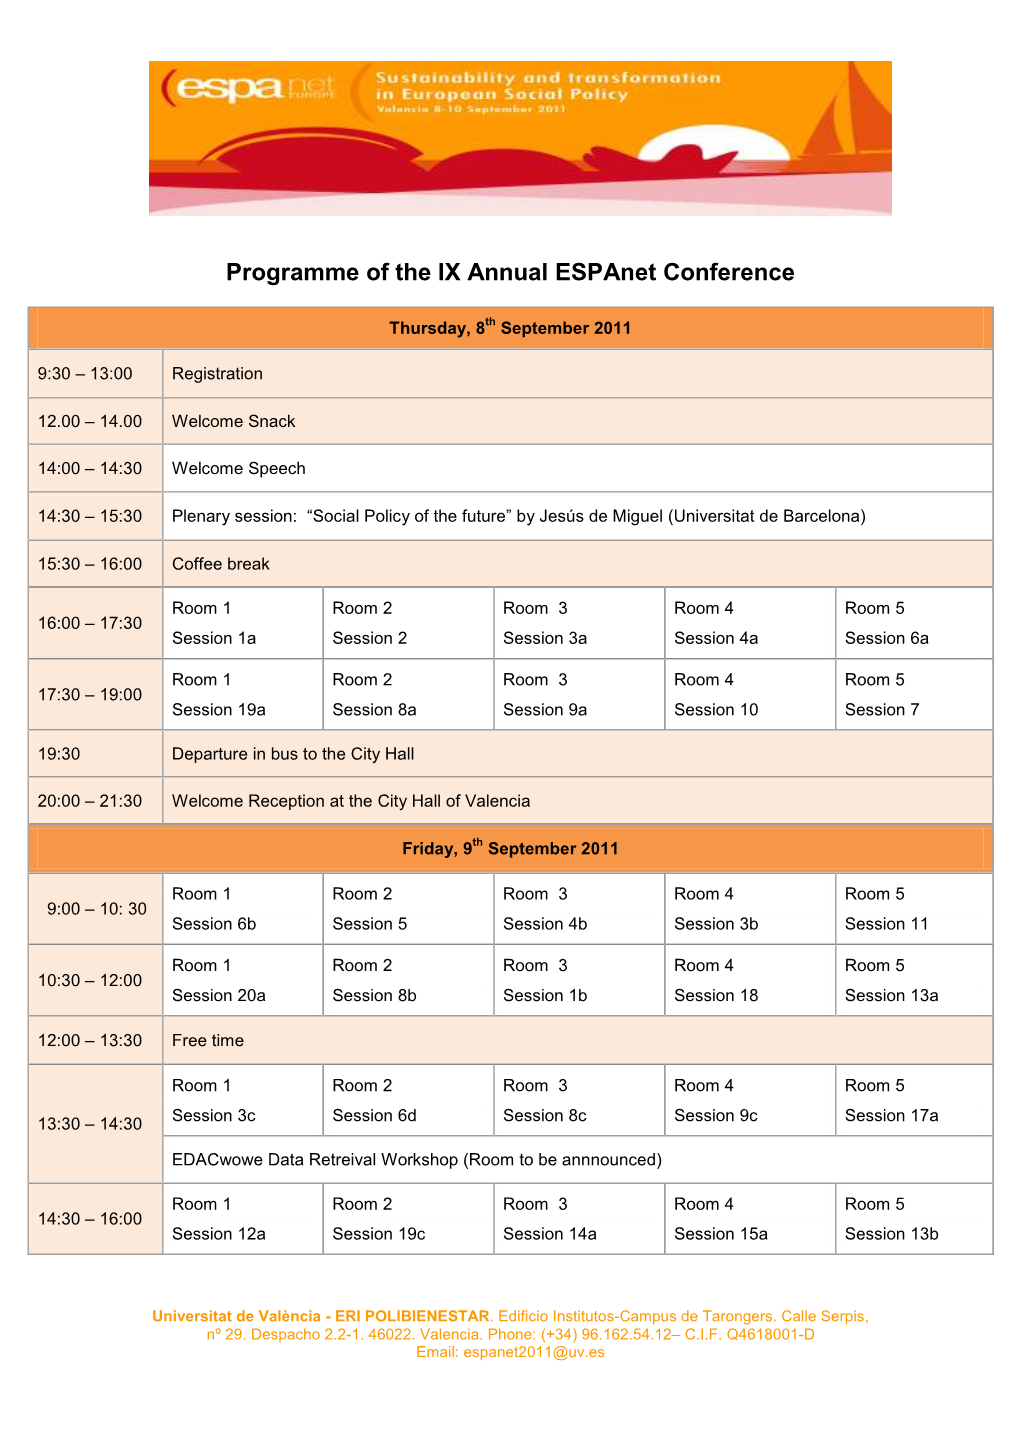 Programme of the IX Annual Espanet Conference